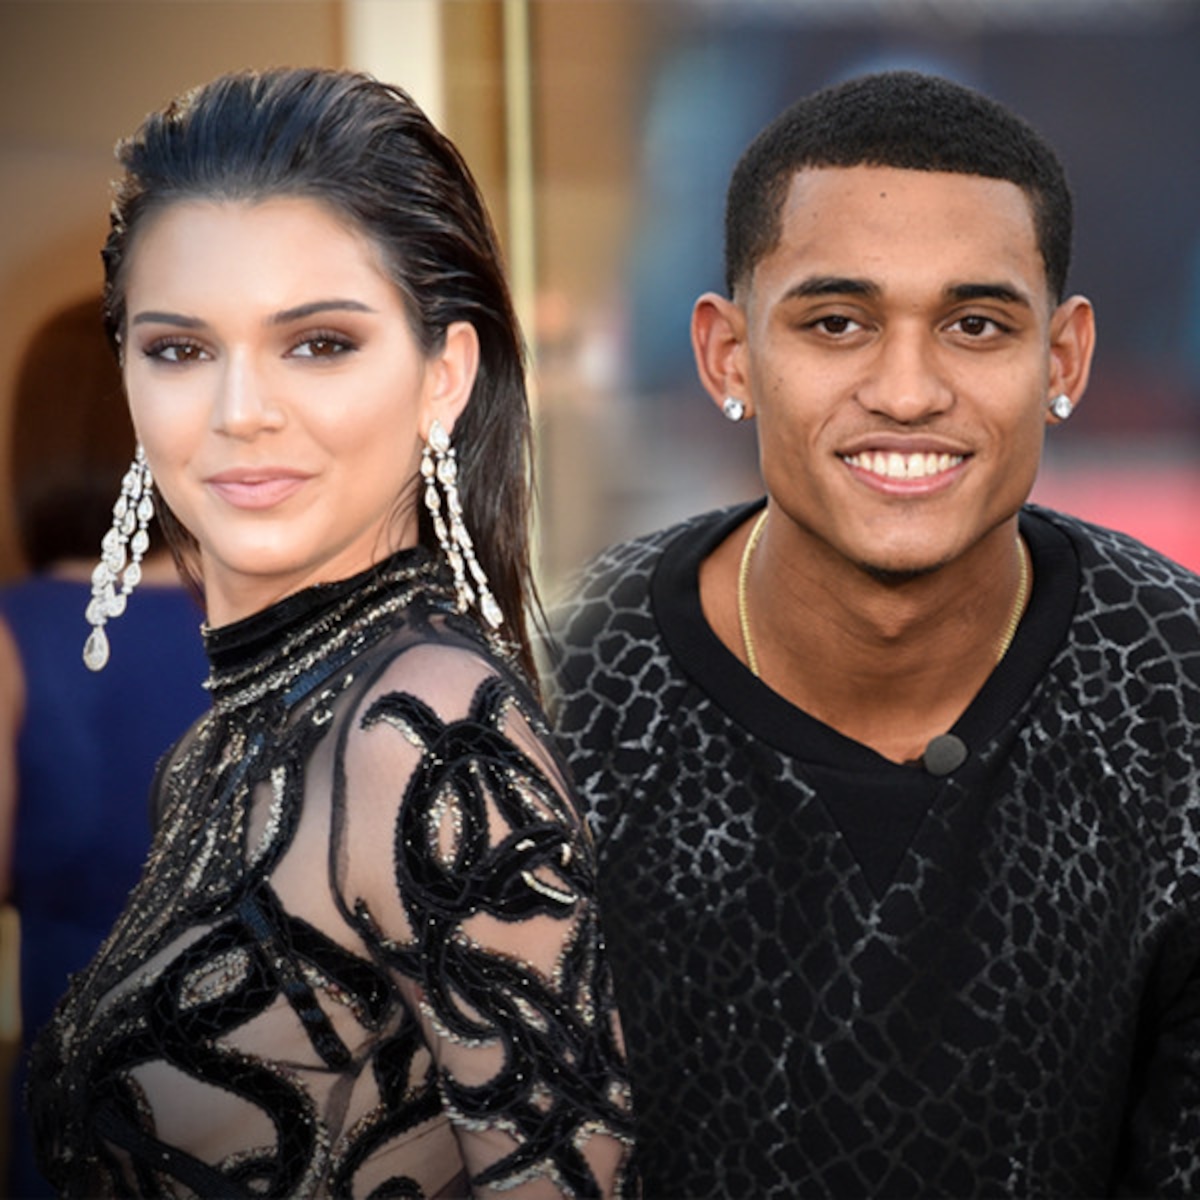 alarm Conflict buyer What's Really Going on Between Kendall Jenner & Jordan Clarkson? Watch - E!  Online